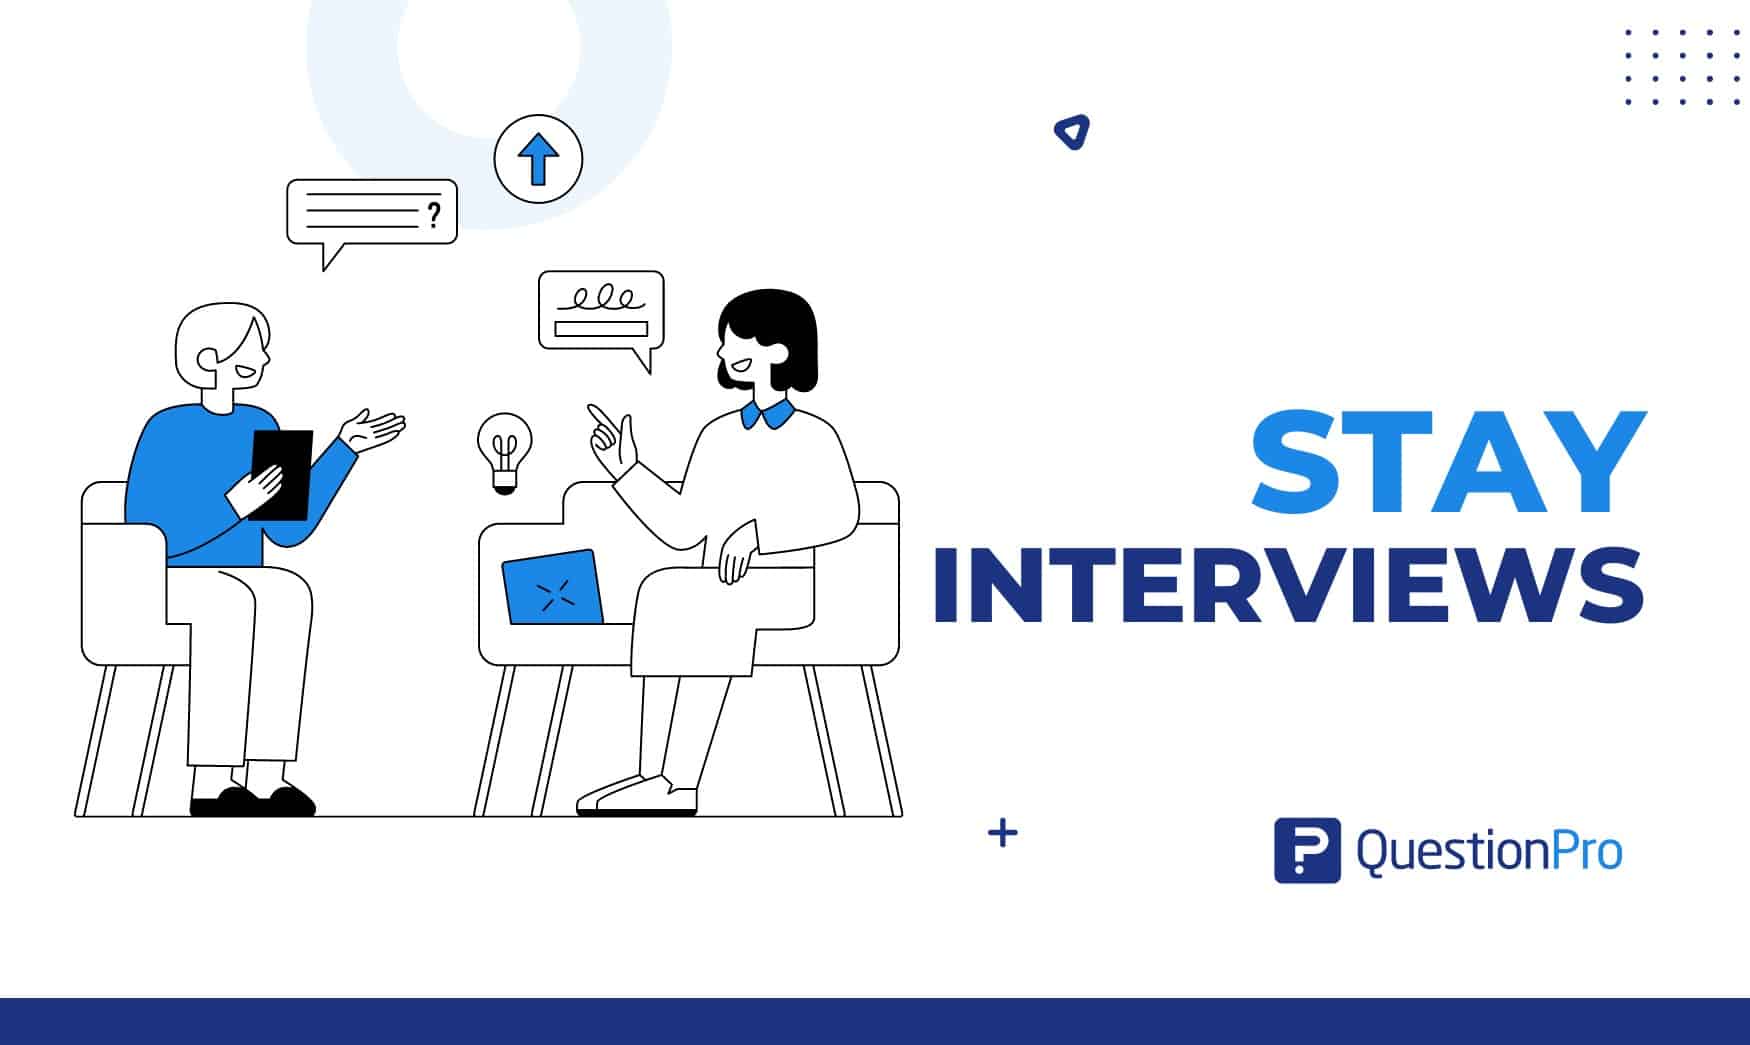 Stay Interviews: What Is It, How to Conduct, 15 Questions